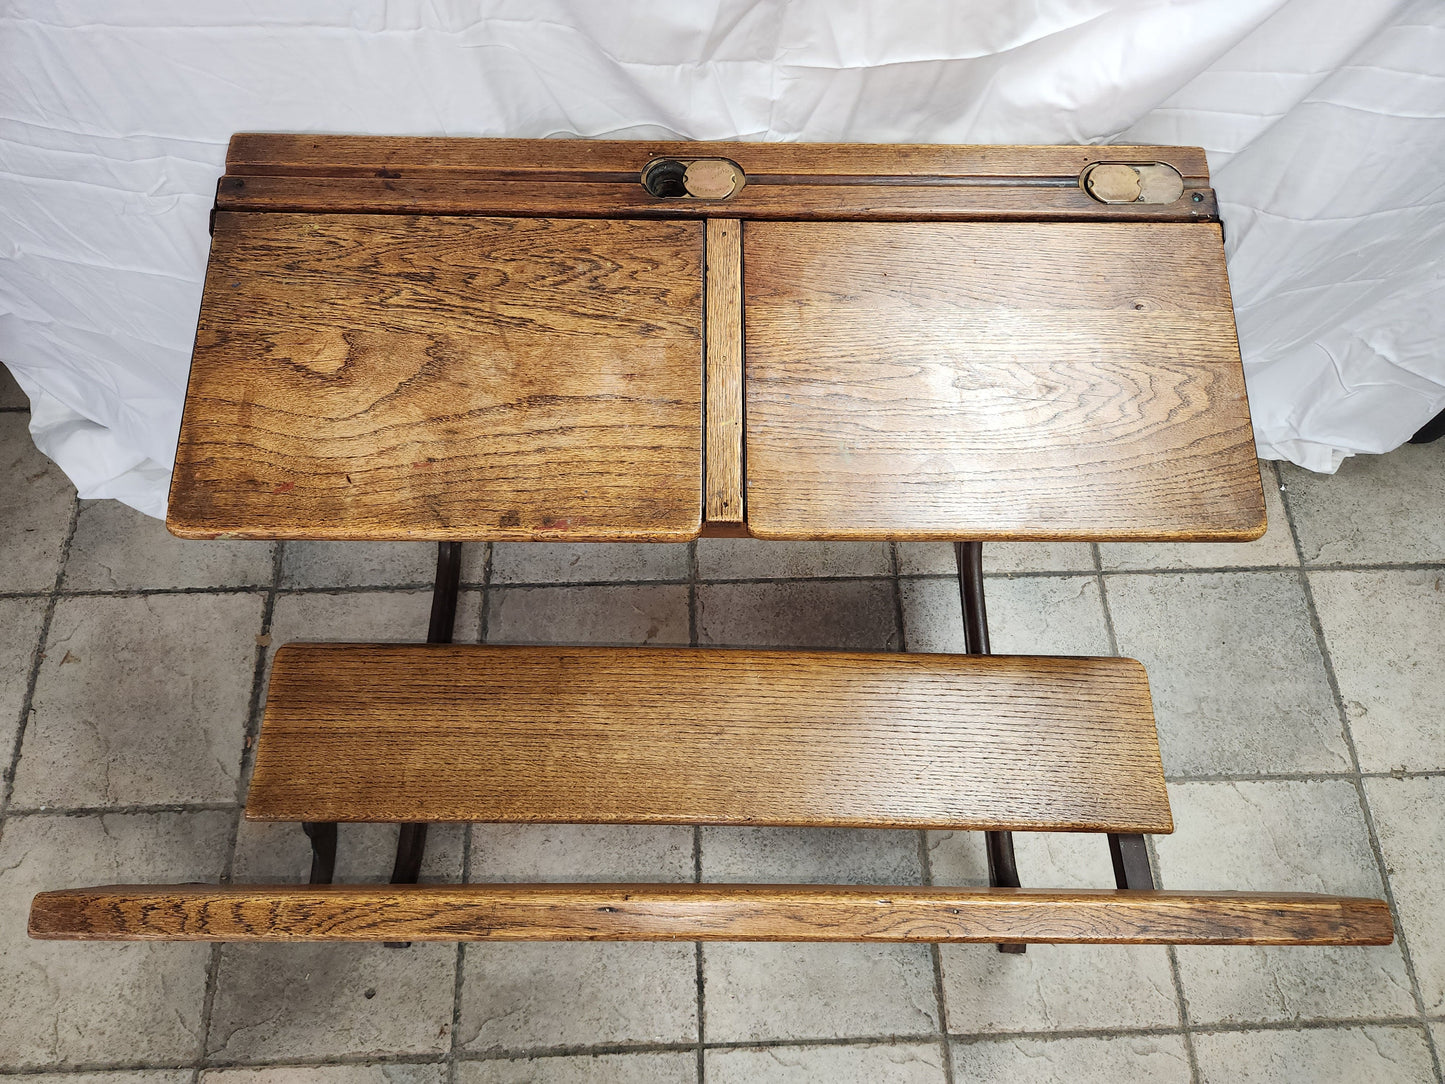 RARE/VTG Bromwich Duel Oak Desk w/Bench & Brass Ink Wells by KingFisher - LOCAL PICK-UP ONLY